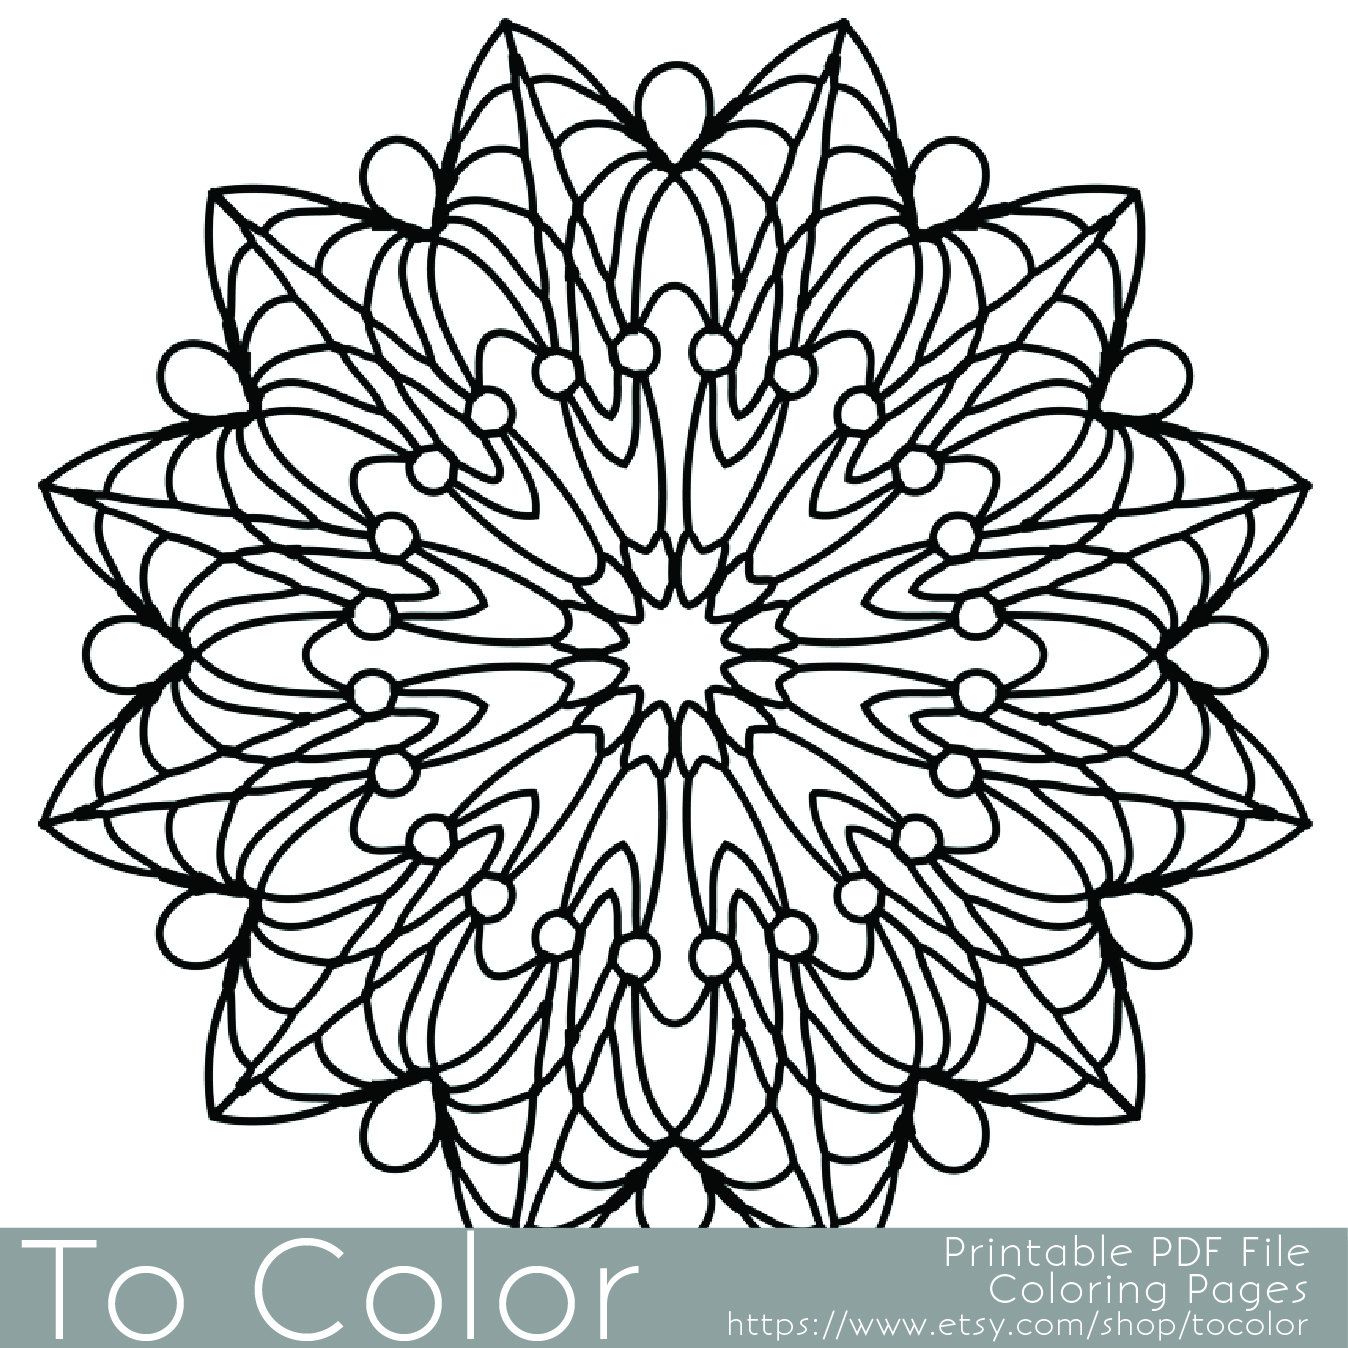 Gel Pen Coloring Pages At GetColorings Free Printable Colorings Pages To Print And Color